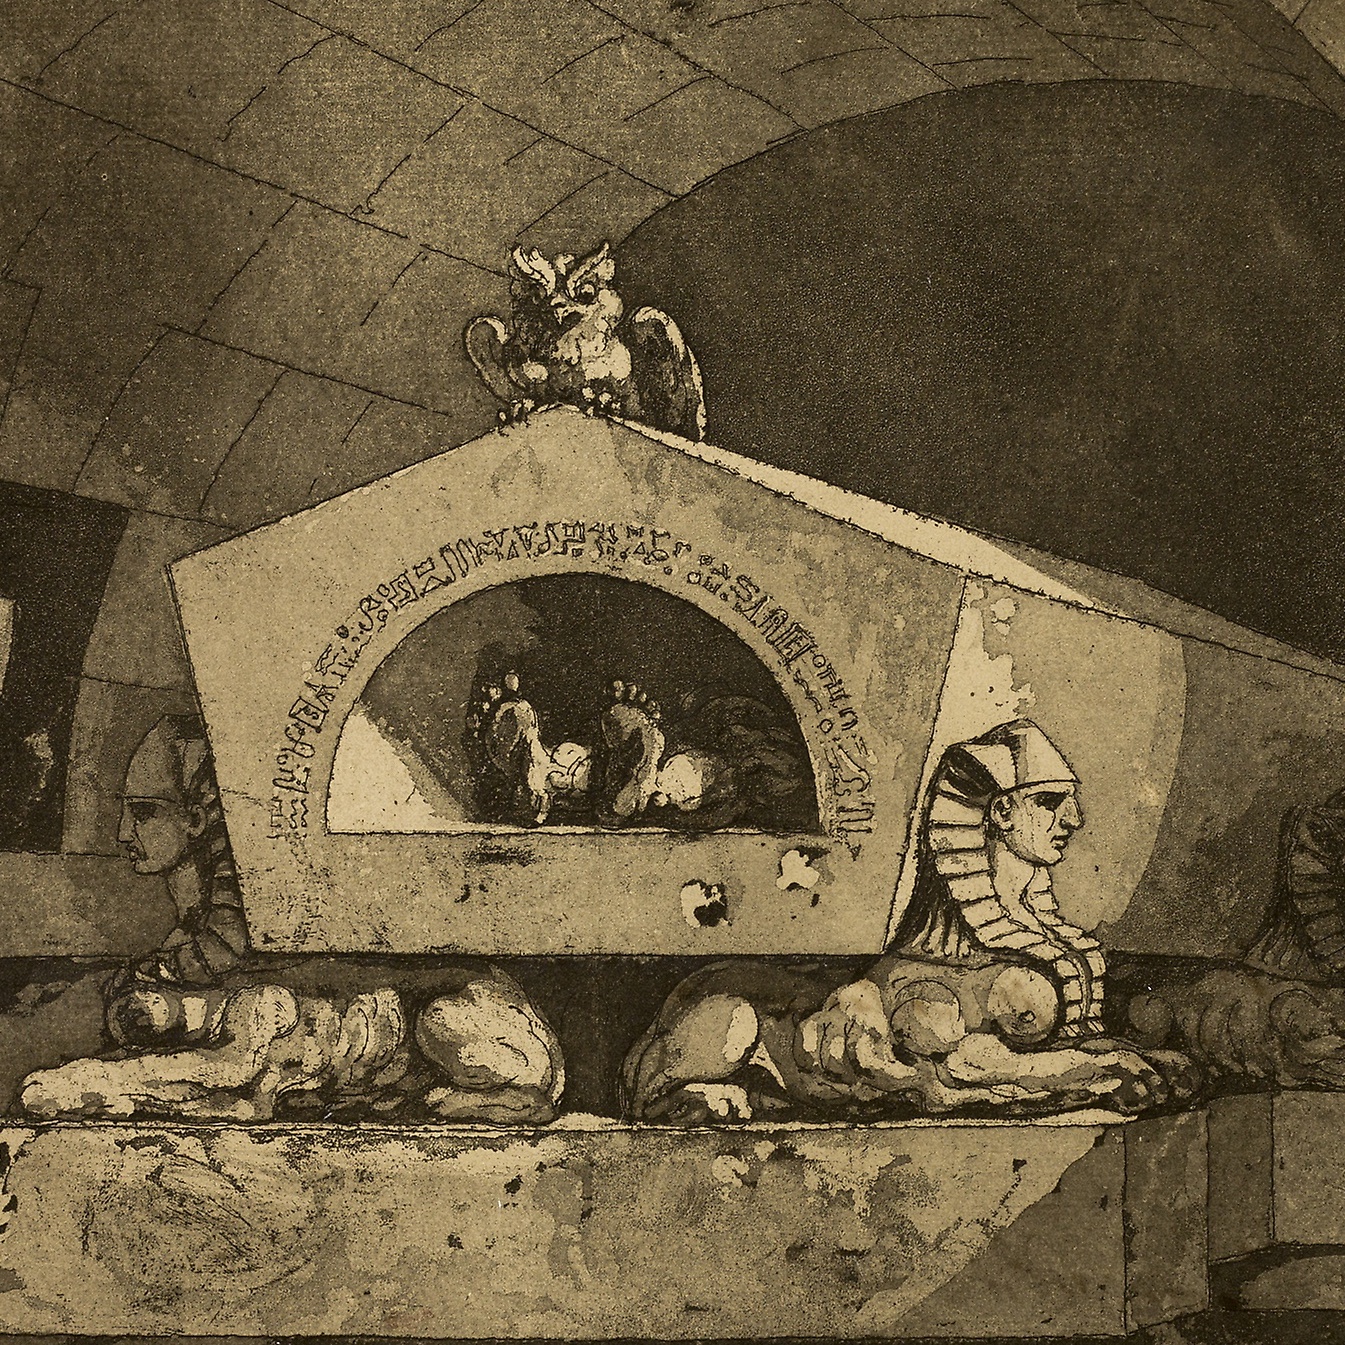 Louis Jean Desprez, Tomb with Sphinxes and an Owl, 1779-84